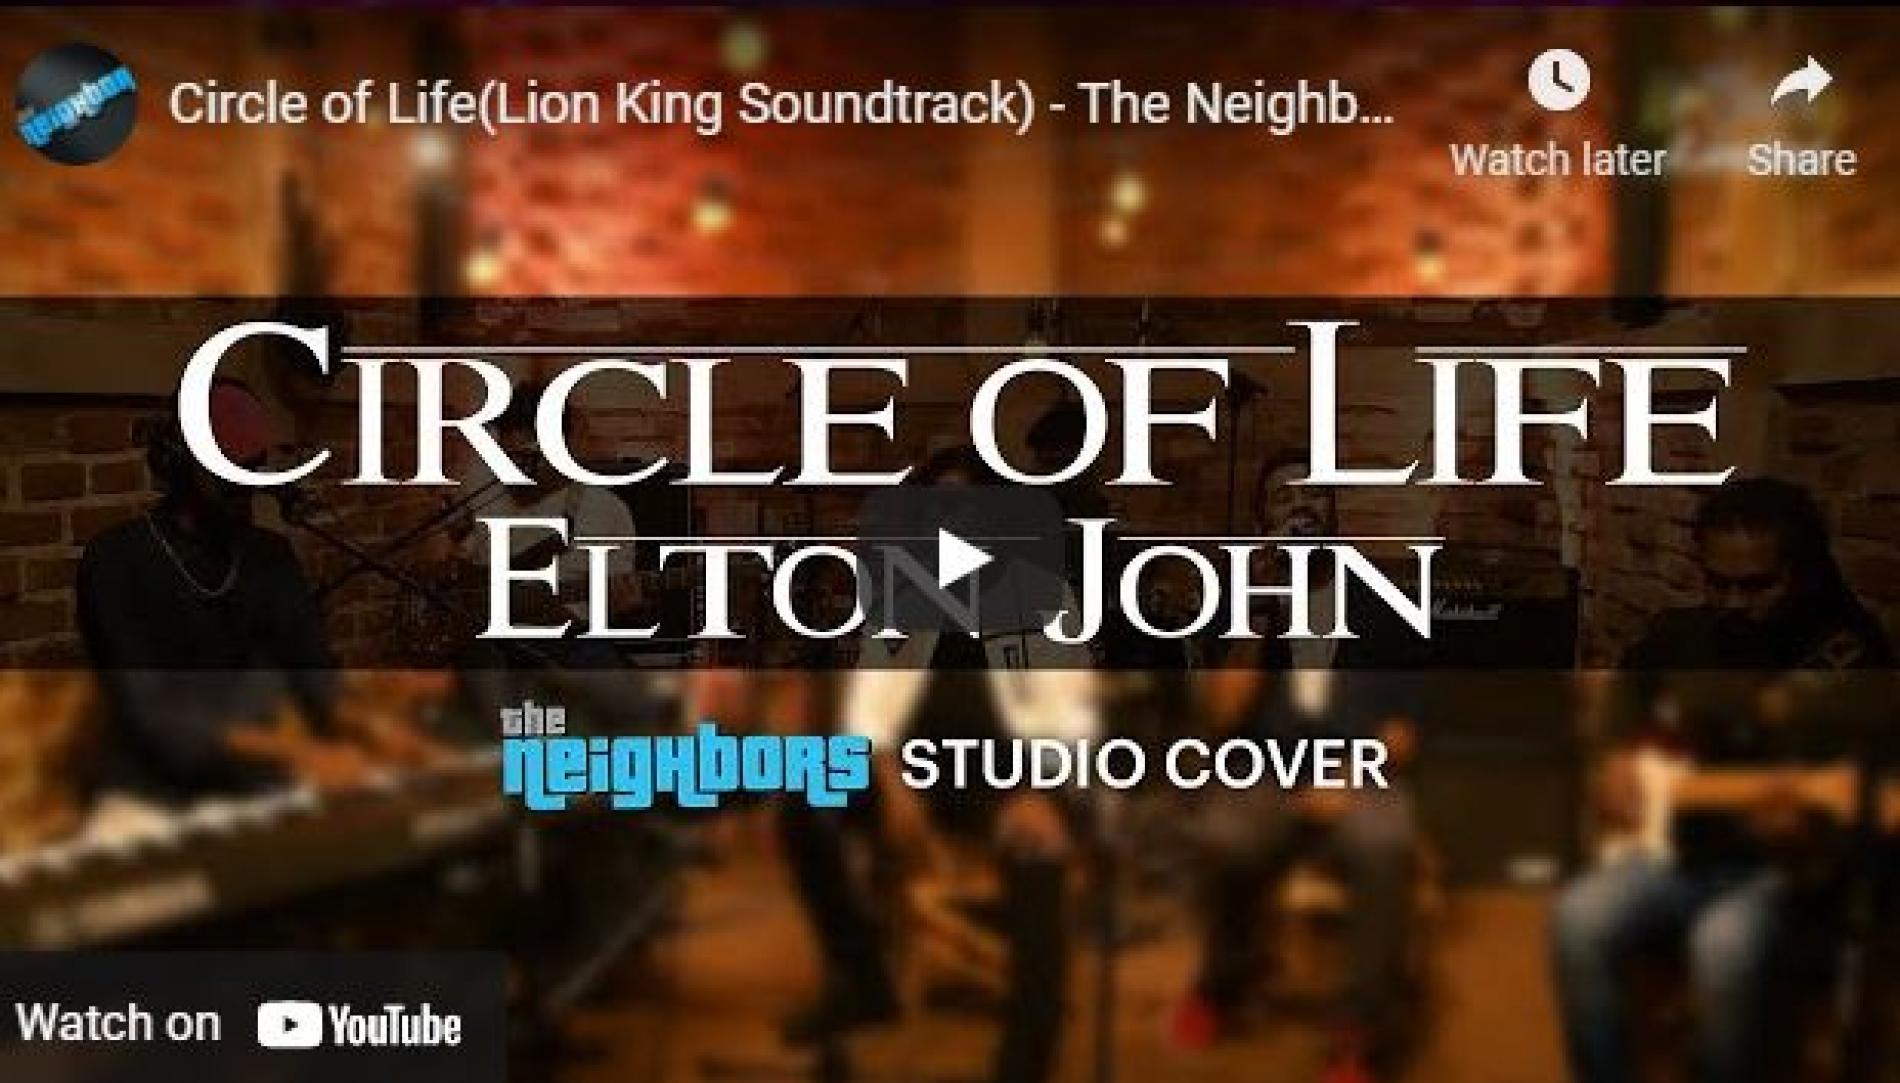 New Music : Circle of Life(Lion King Soundtrack) – The Neighbors Studio Live Cover